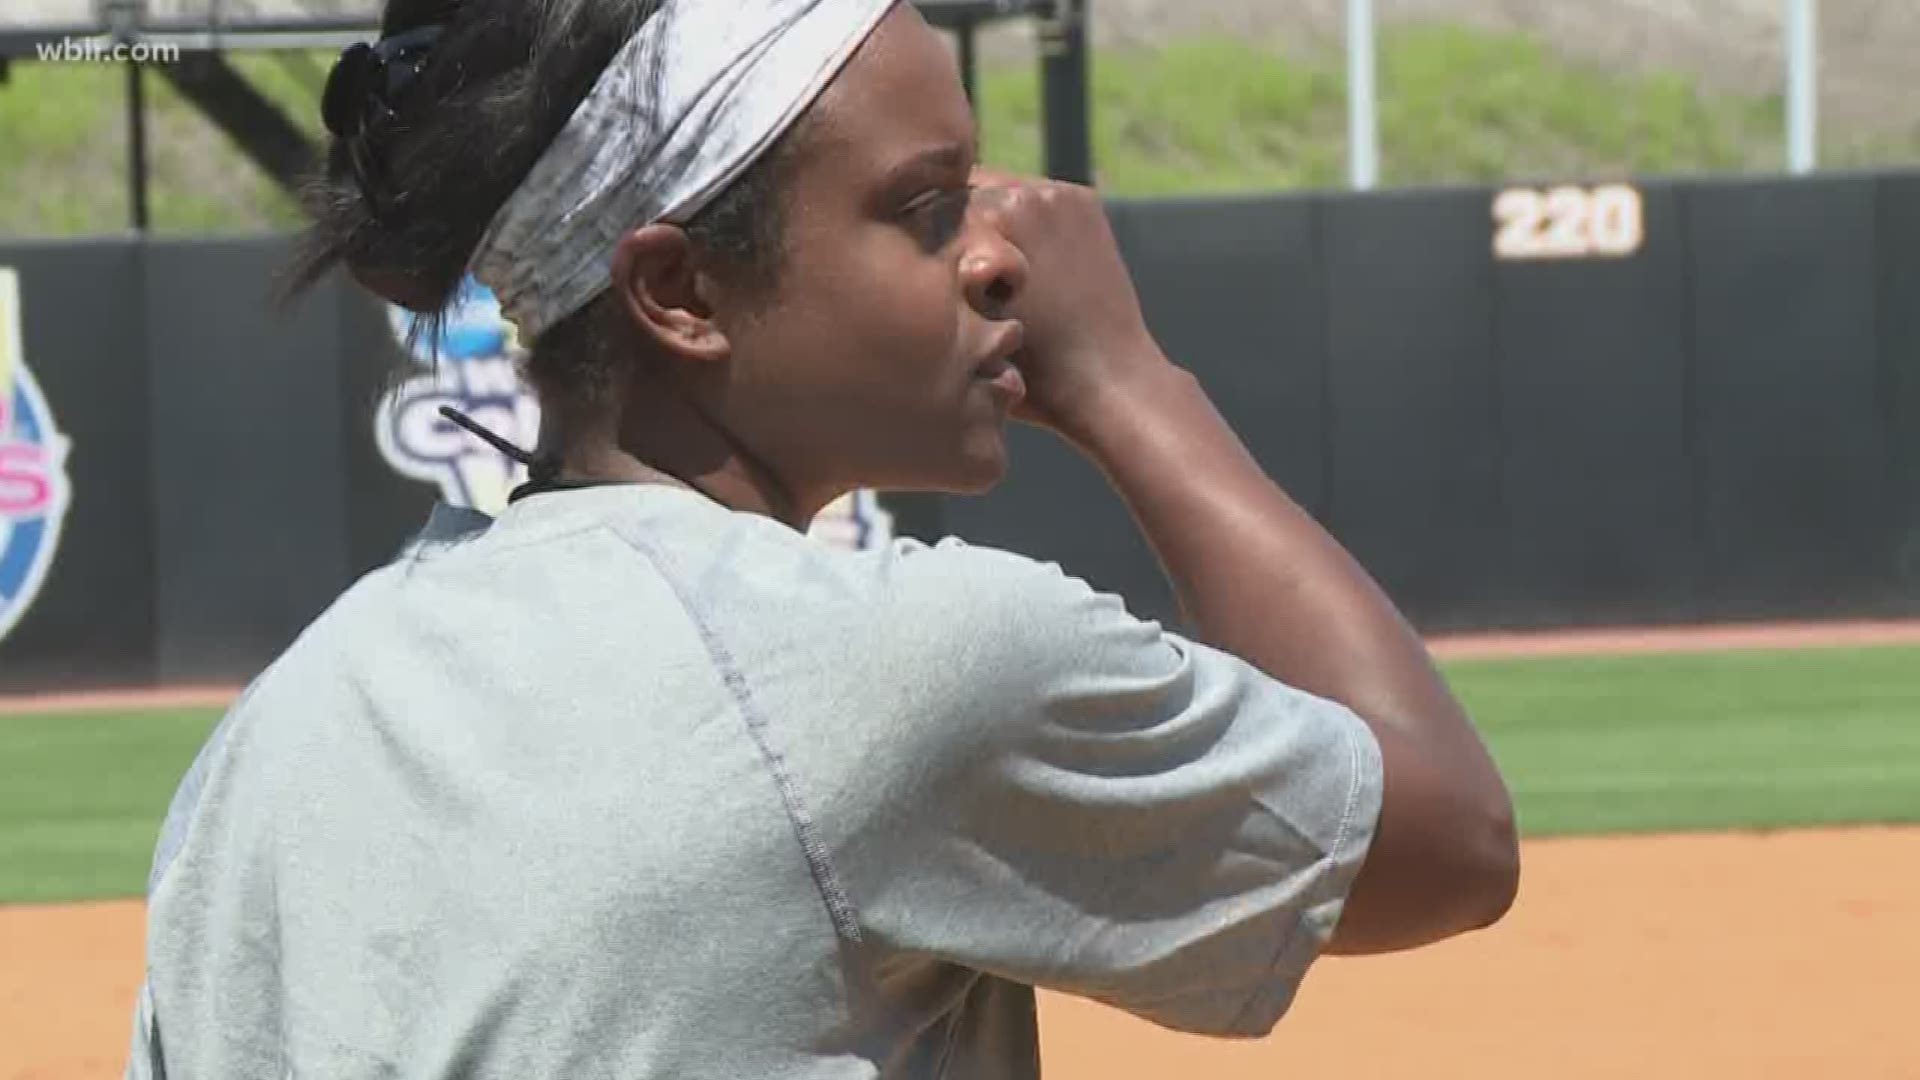 India Chiles is one of the best players in Tennessee softball history and perhaps the toughest. After spending some time in the "real world," she's back with the Lady Vols, helping the slap hitters as a volunteer assistant coach.